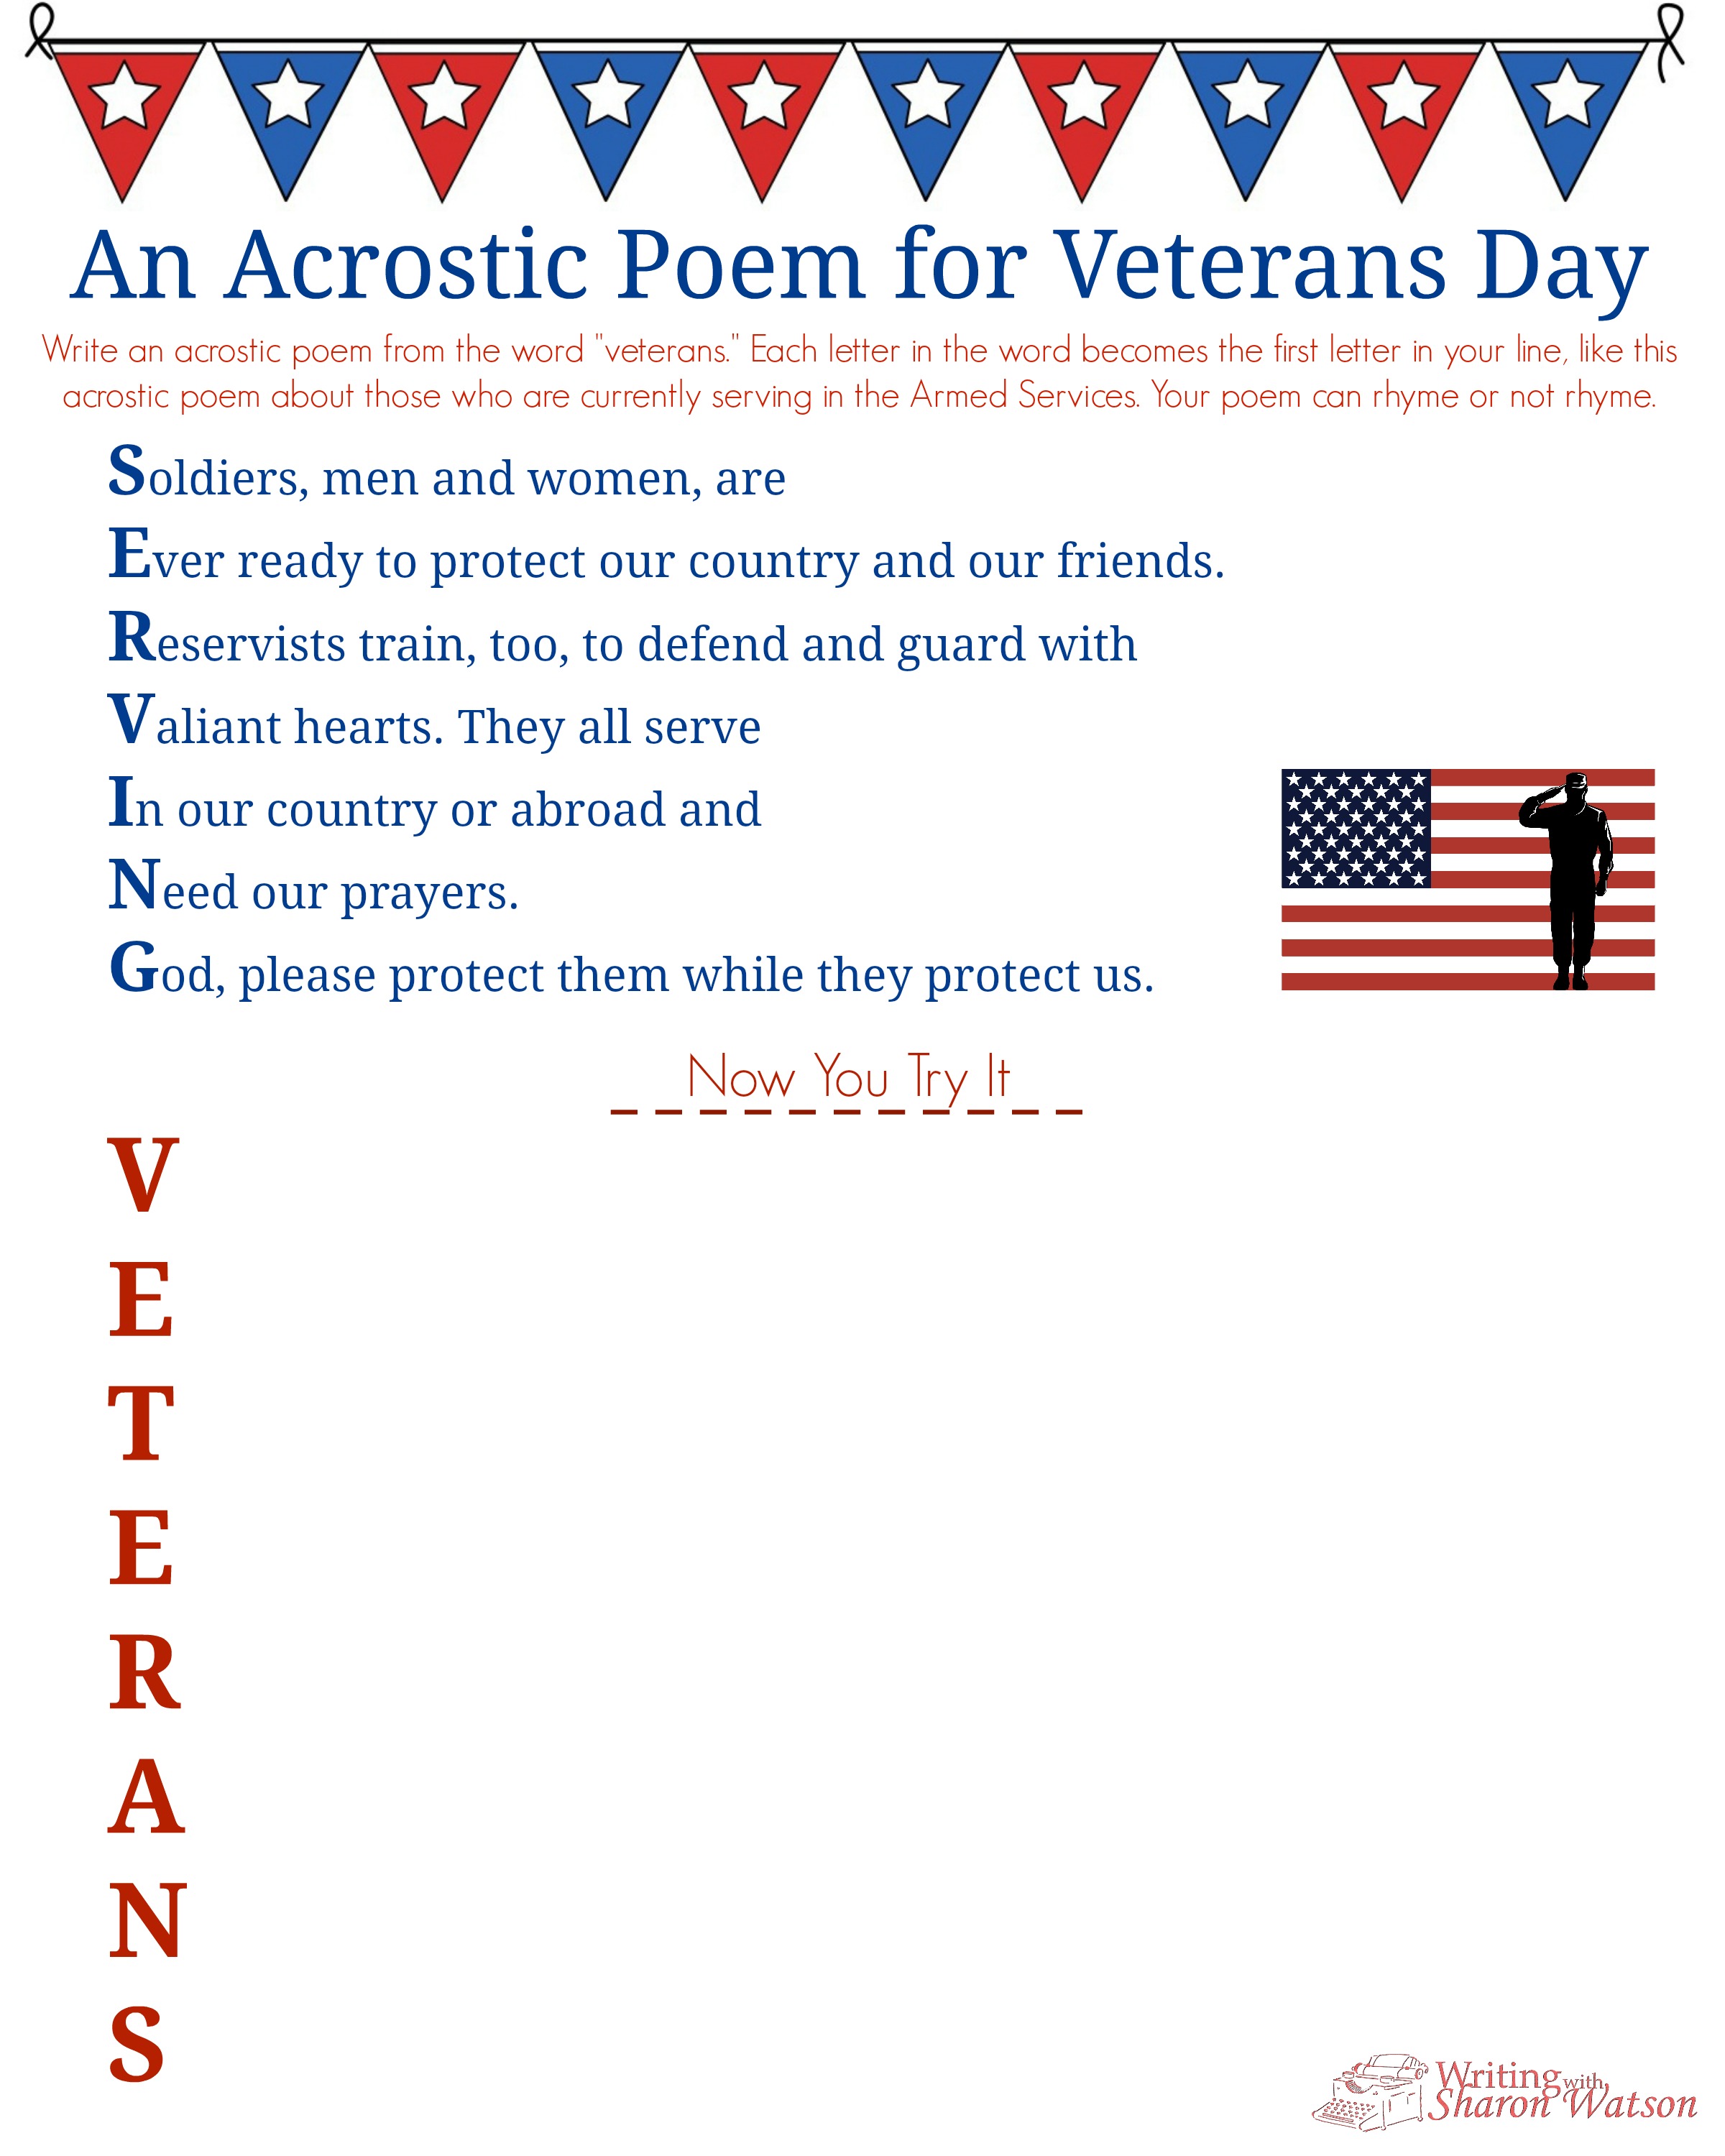 veterans-day-acrostic-poem-image-writing-with-sharon-watson-easy-to